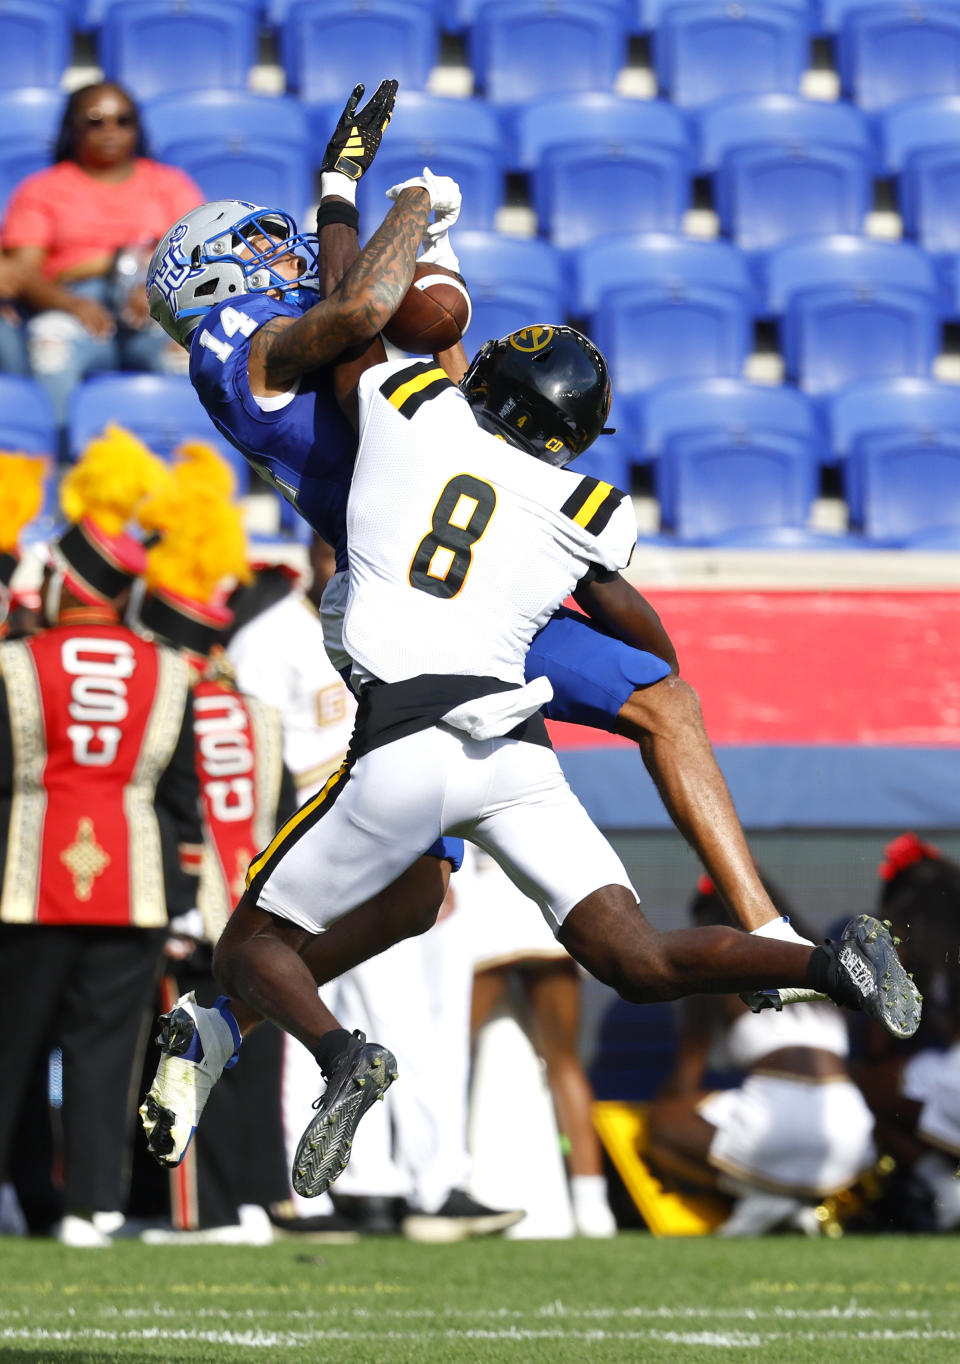 Grambling State Osiris Smith (8) takes the ball from Hampton wide receiver Armand Vinson (14) during the first half of an NCAA college football game, Saturday, Sept. 2, 2023, in Harrison, N.J. (AP Photo/Noah K. Murray)